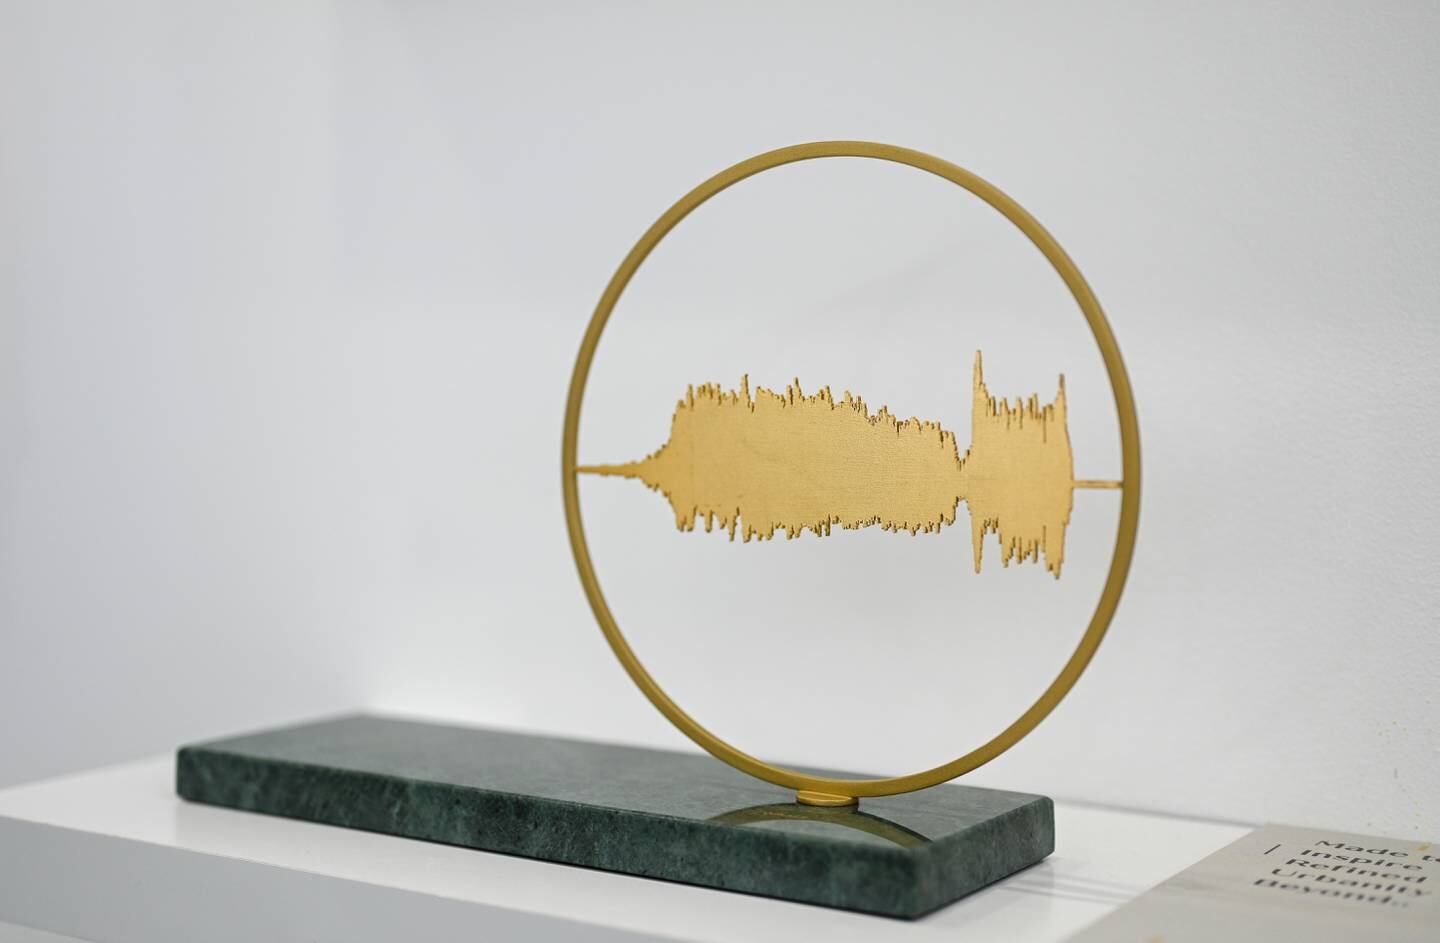 Sara Al Harbali’s steel and gold leaf wall sculptures from the Revelation Spectogram Collection, which transmutes Quranic verse into sound waves. It's part of UAE Designer Exhibition at Dubai Design Week. Photo: the artist and Dubai Design Week